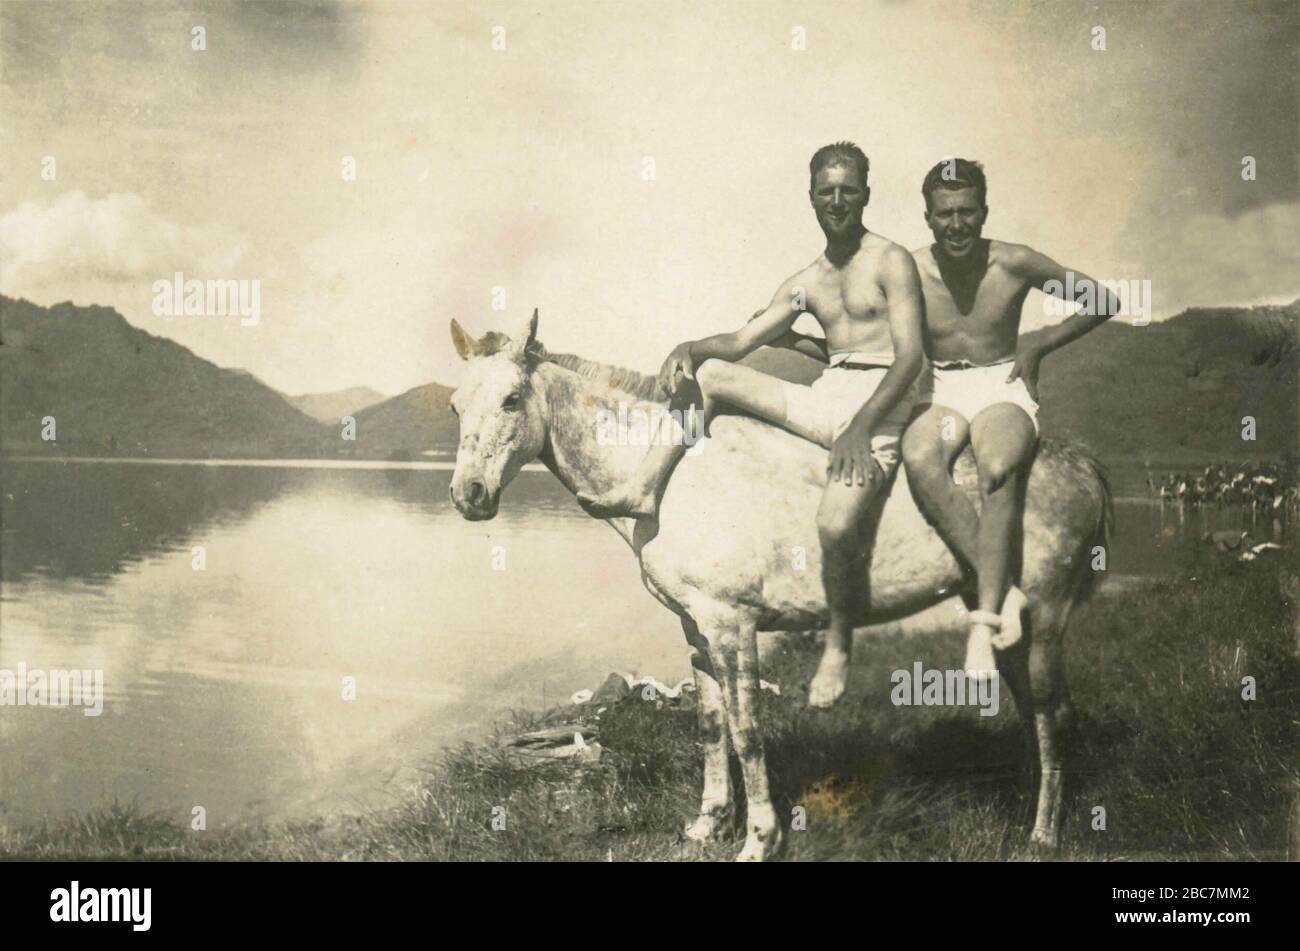 Two men on a white horse at the lake, Italy 1930s Stock Photo